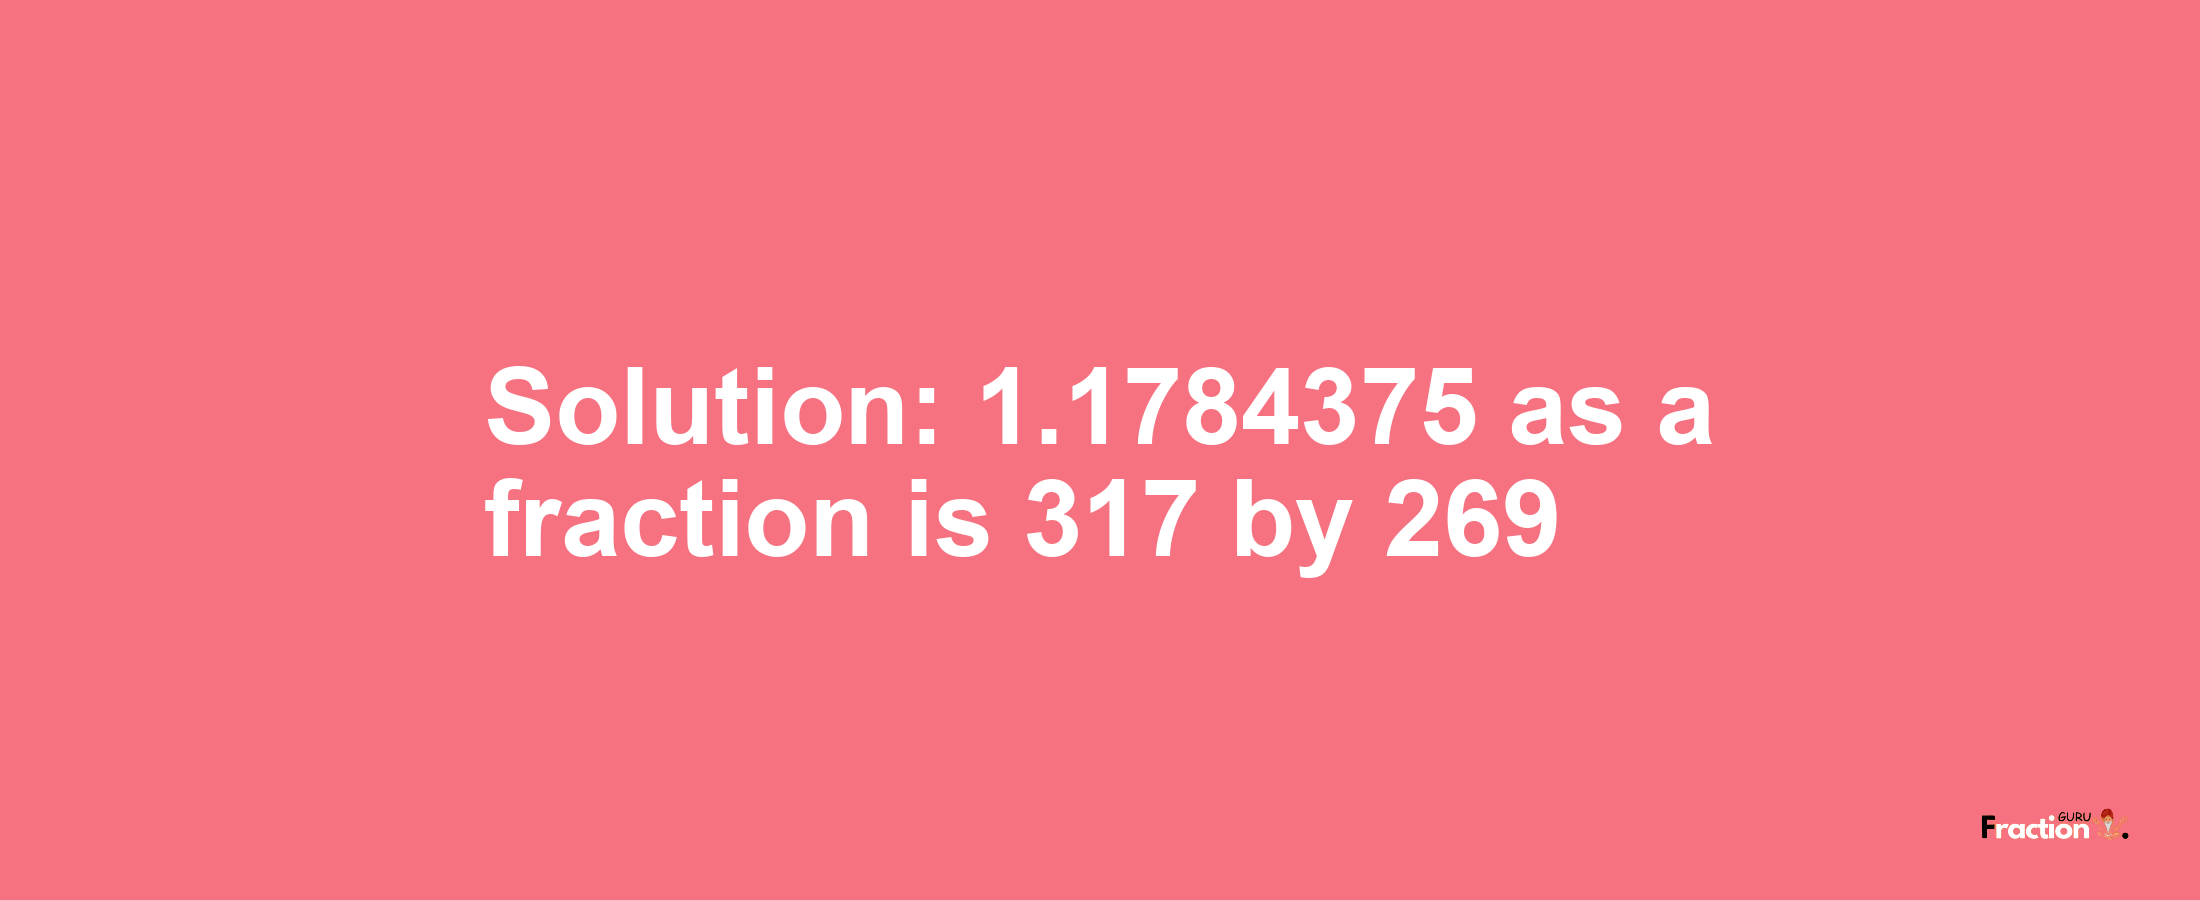 Solution:1.1784375 as a fraction is 317/269